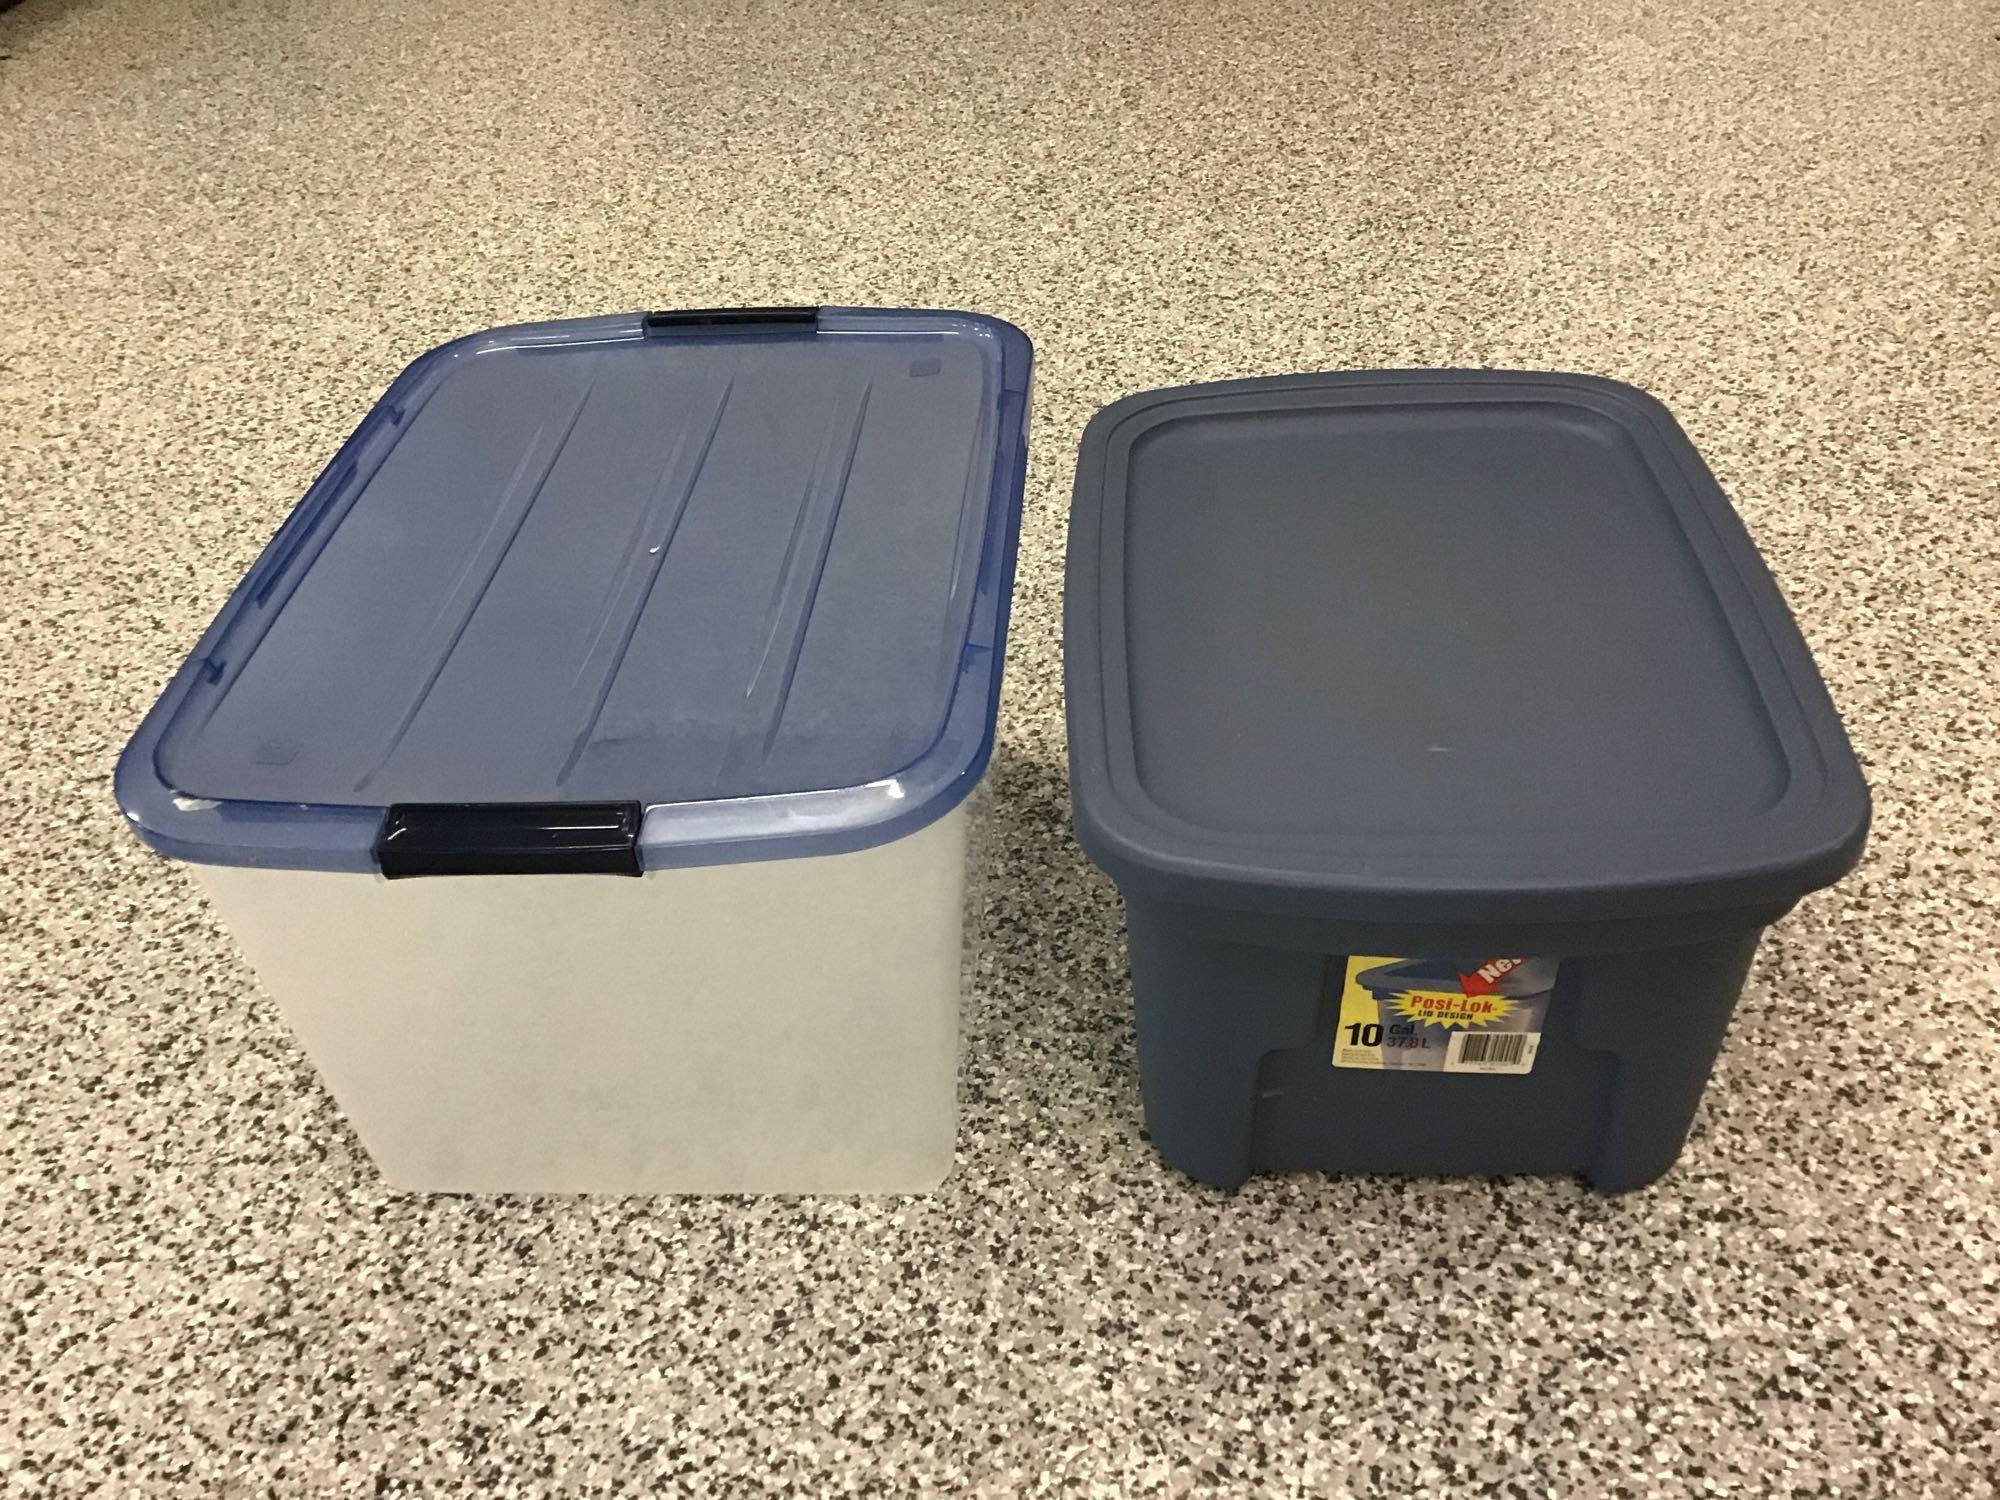 2 storage containers with lids